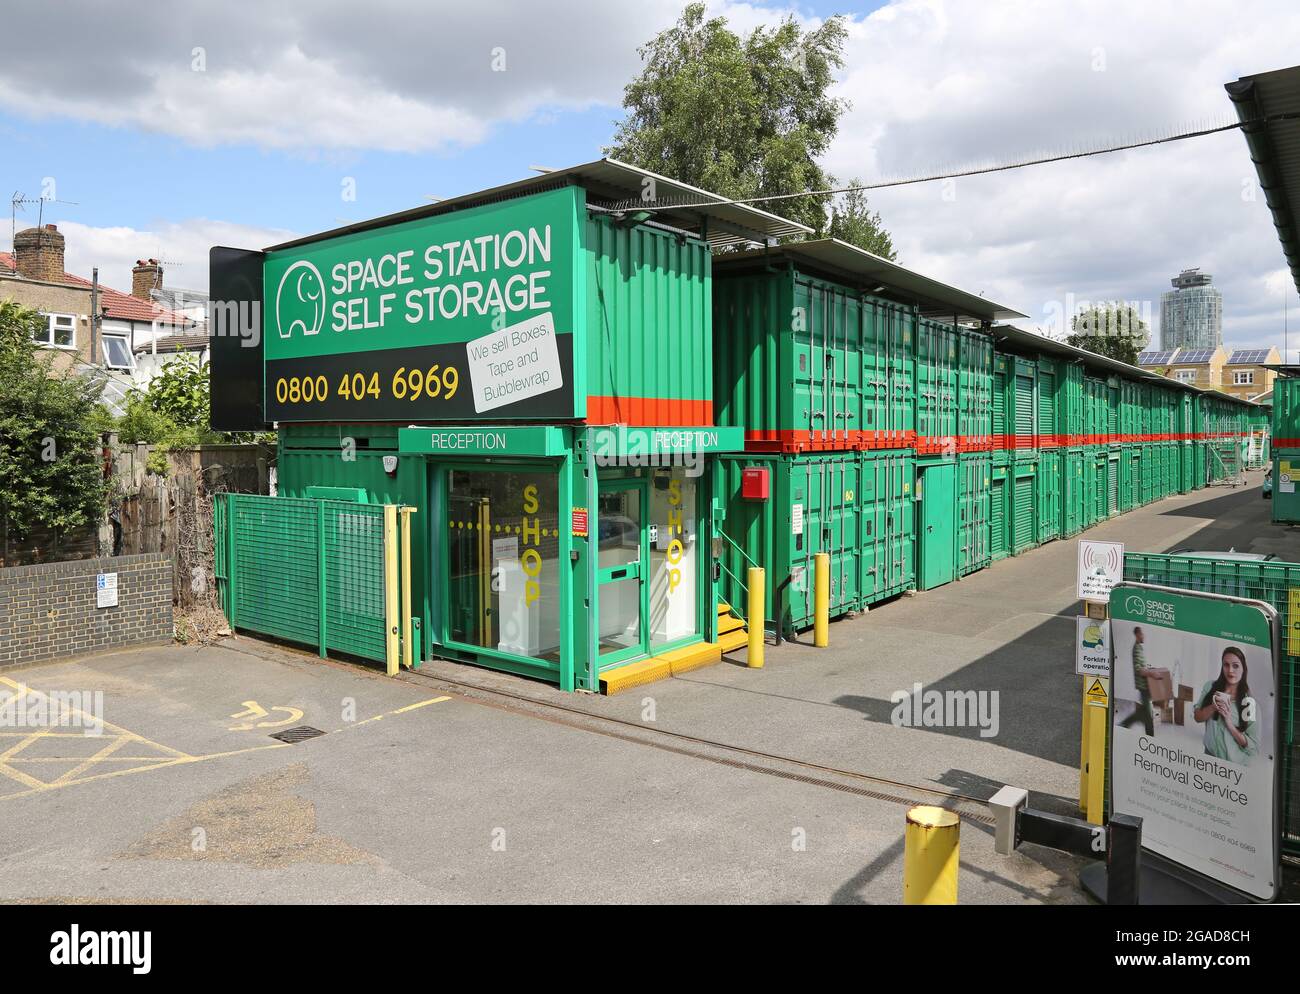 https://c8.alamy.com/comp/2GAD8CH/space-station-self-storage-depot-at-brentford-london-uk-uses-shipping-containers-to-provide-secure-storage-2GAD8CH.jpg